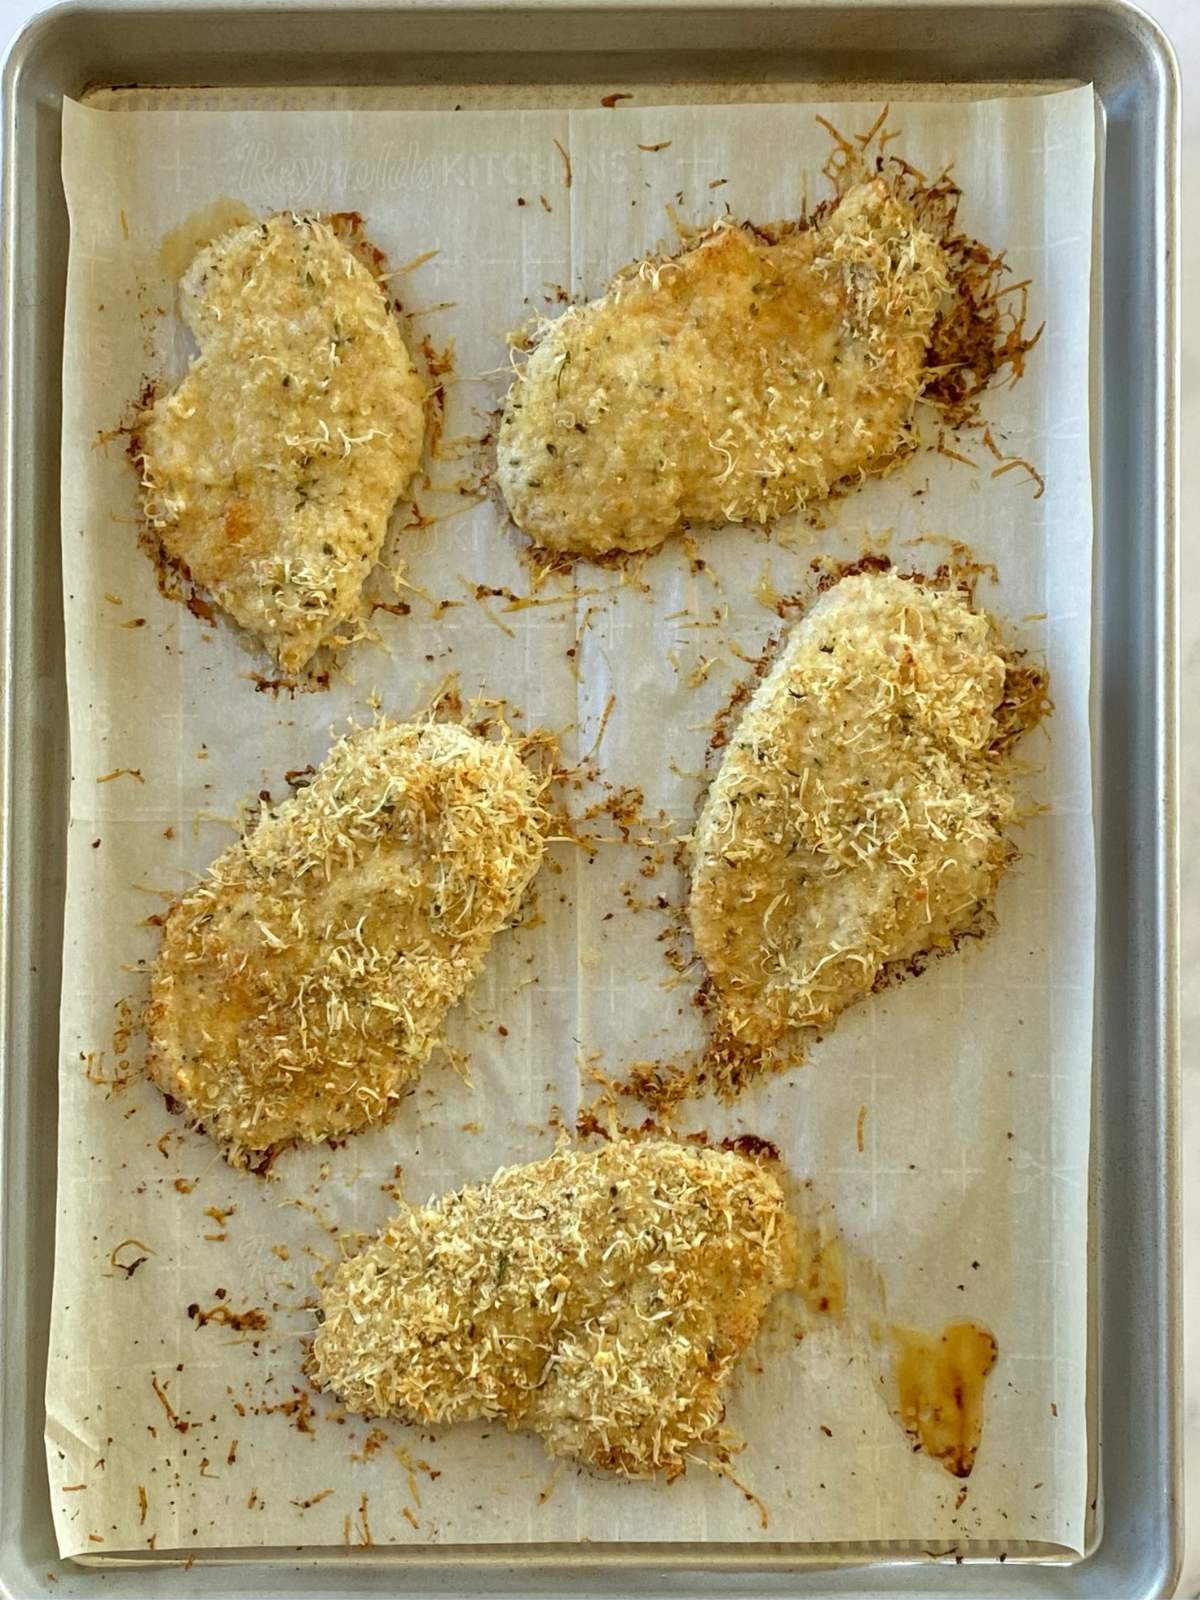 Sheet pan of baked Parmesan coated chicken breasts.